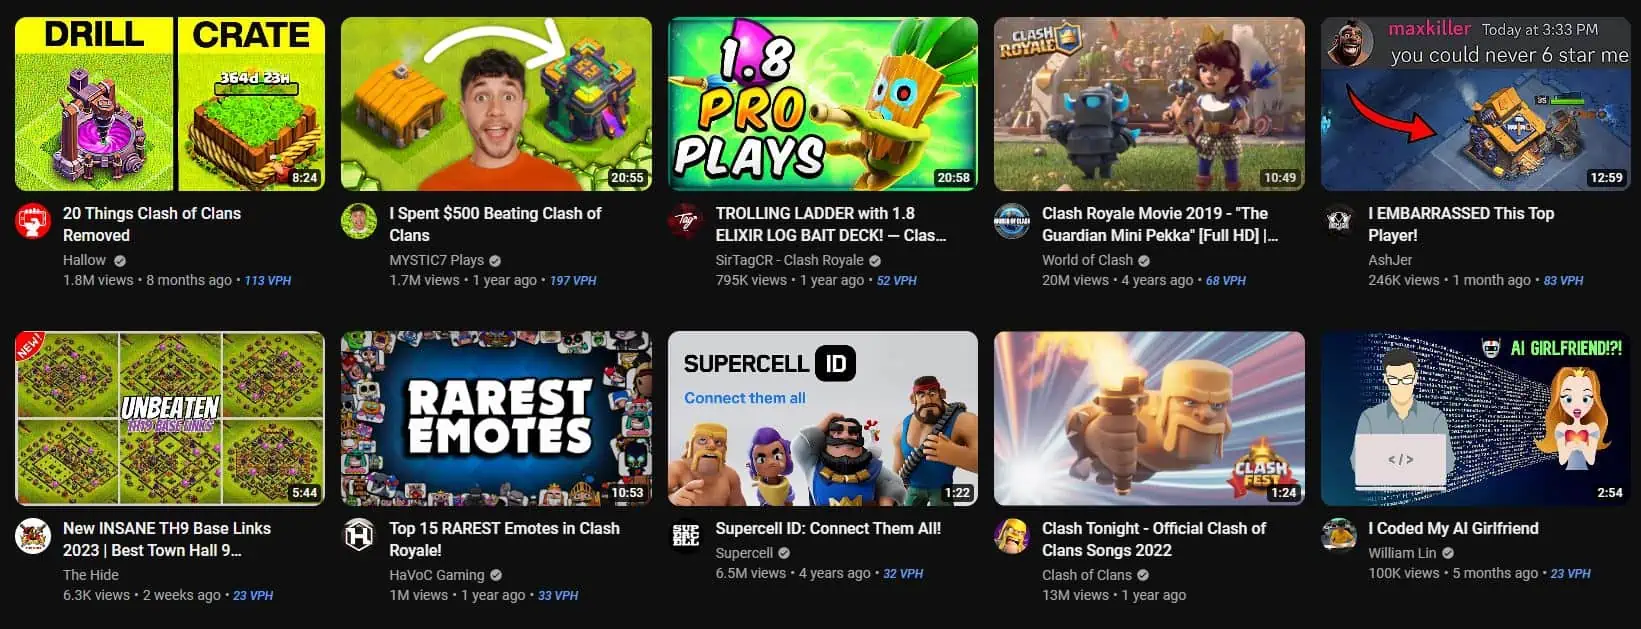 youtube gaming home page thumbnails